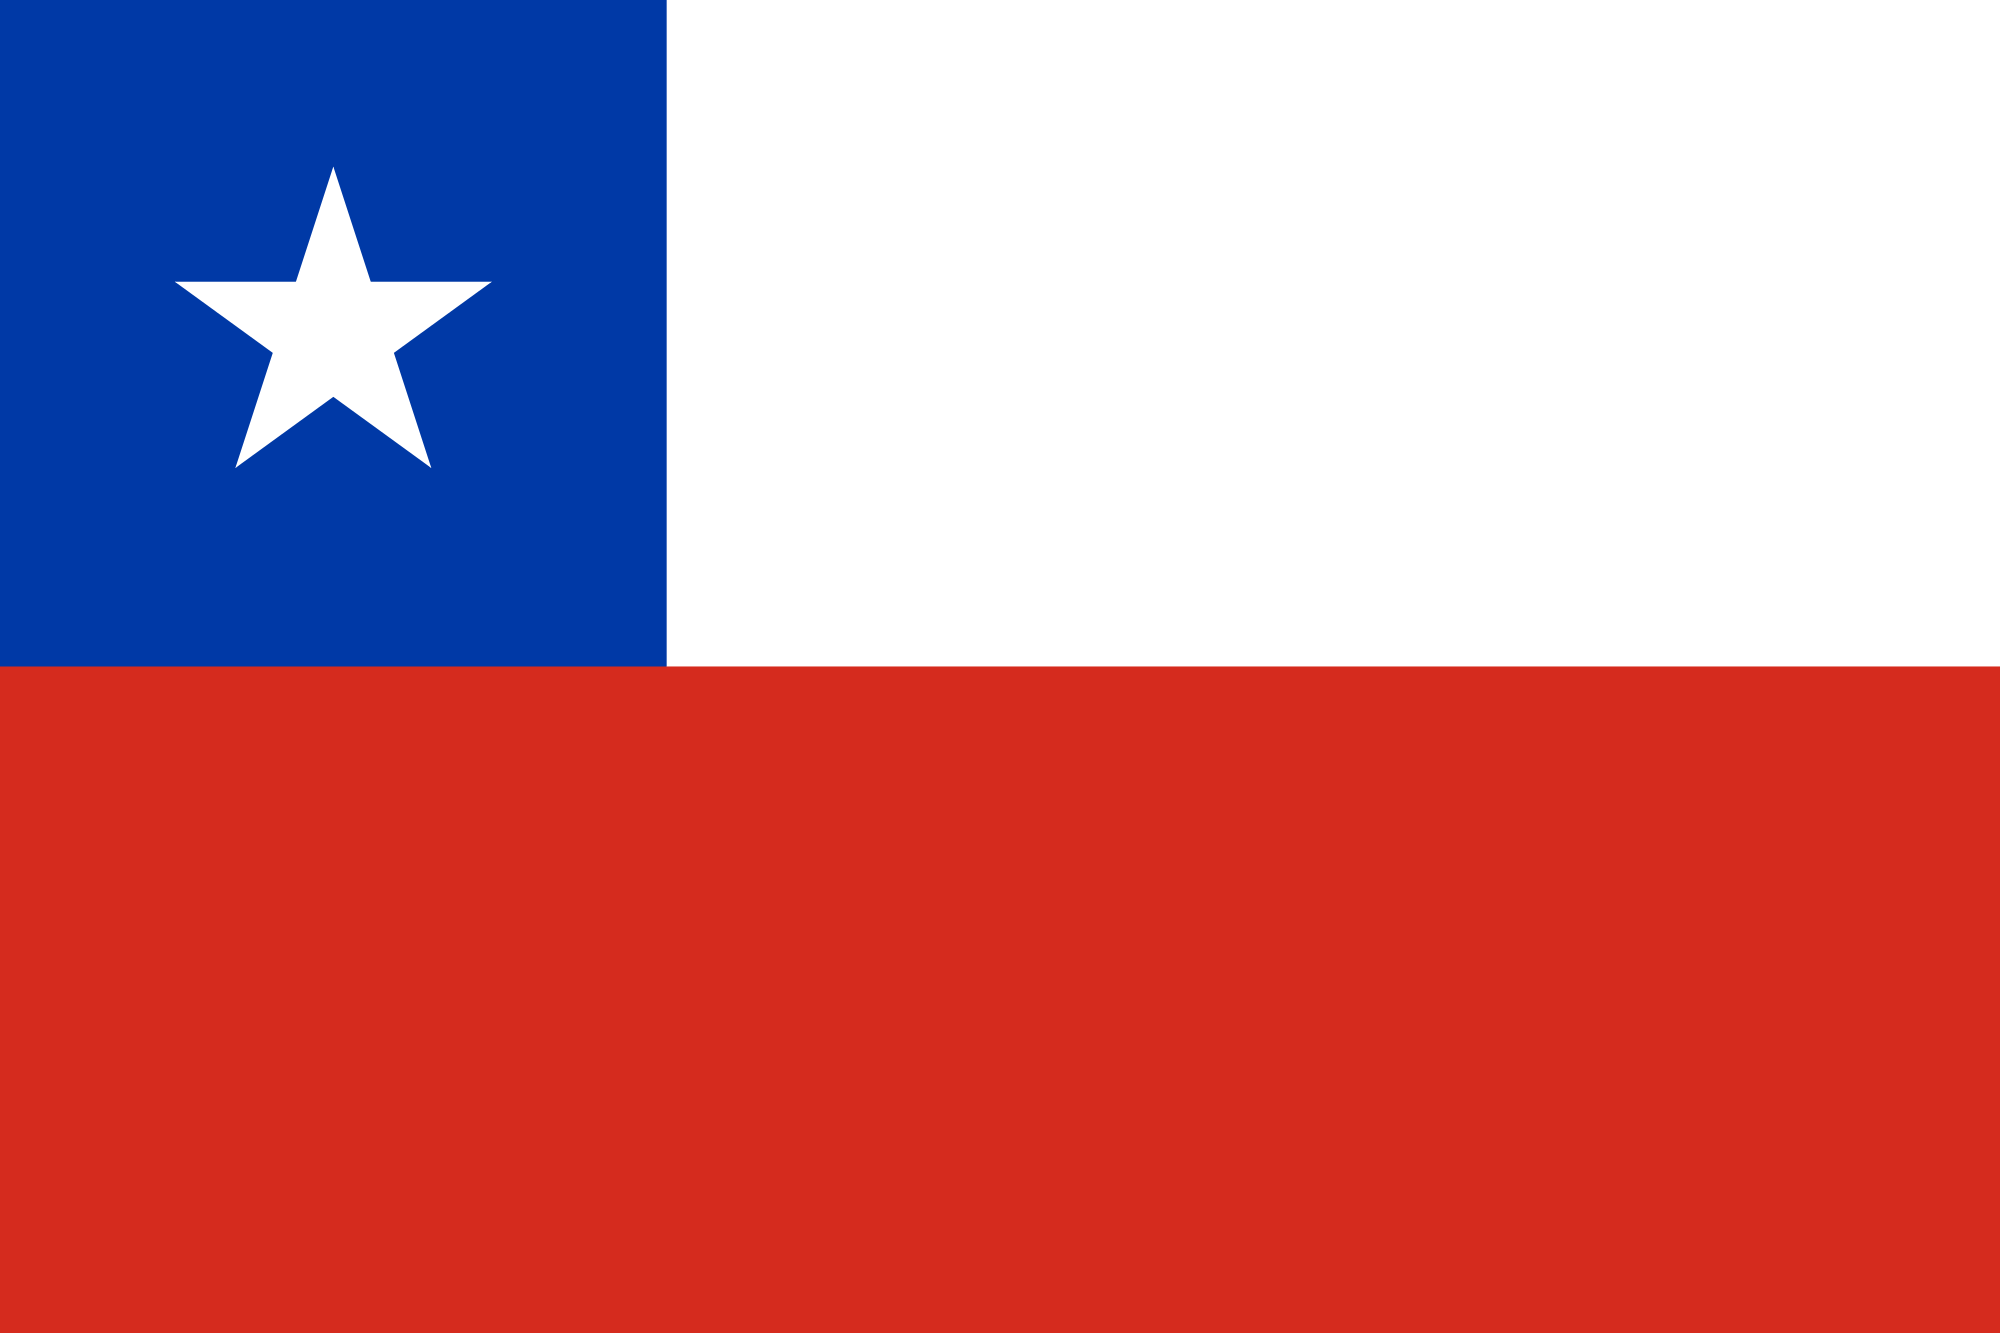 https://upload.wikimedia.org/wikipedia/commons/thumb/7/78/Flag_of_Chile.svg/2000px-Flag_of_Chile.svg.png